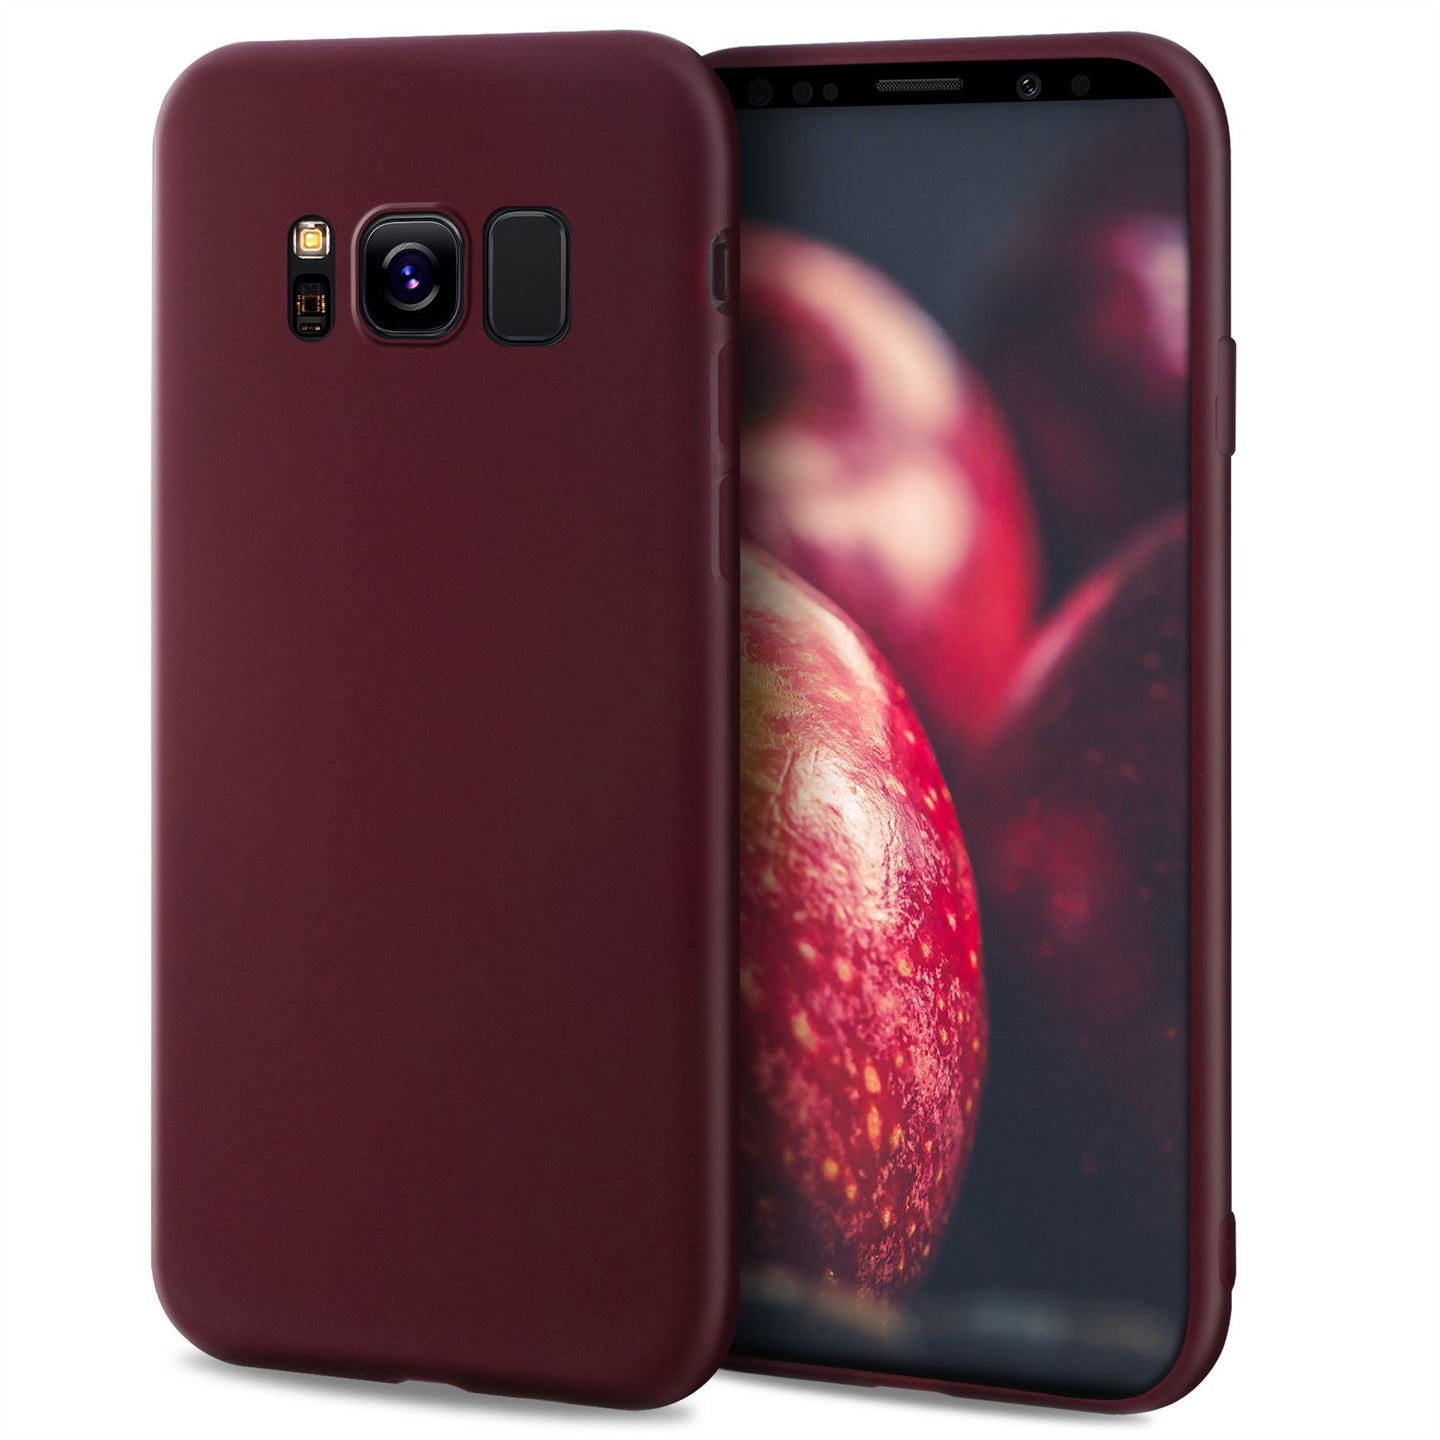 Moozy Minimalist Series Silicone Case for Samsung S8, Wine Red - Matte Finish Slim Soft TPU Cover